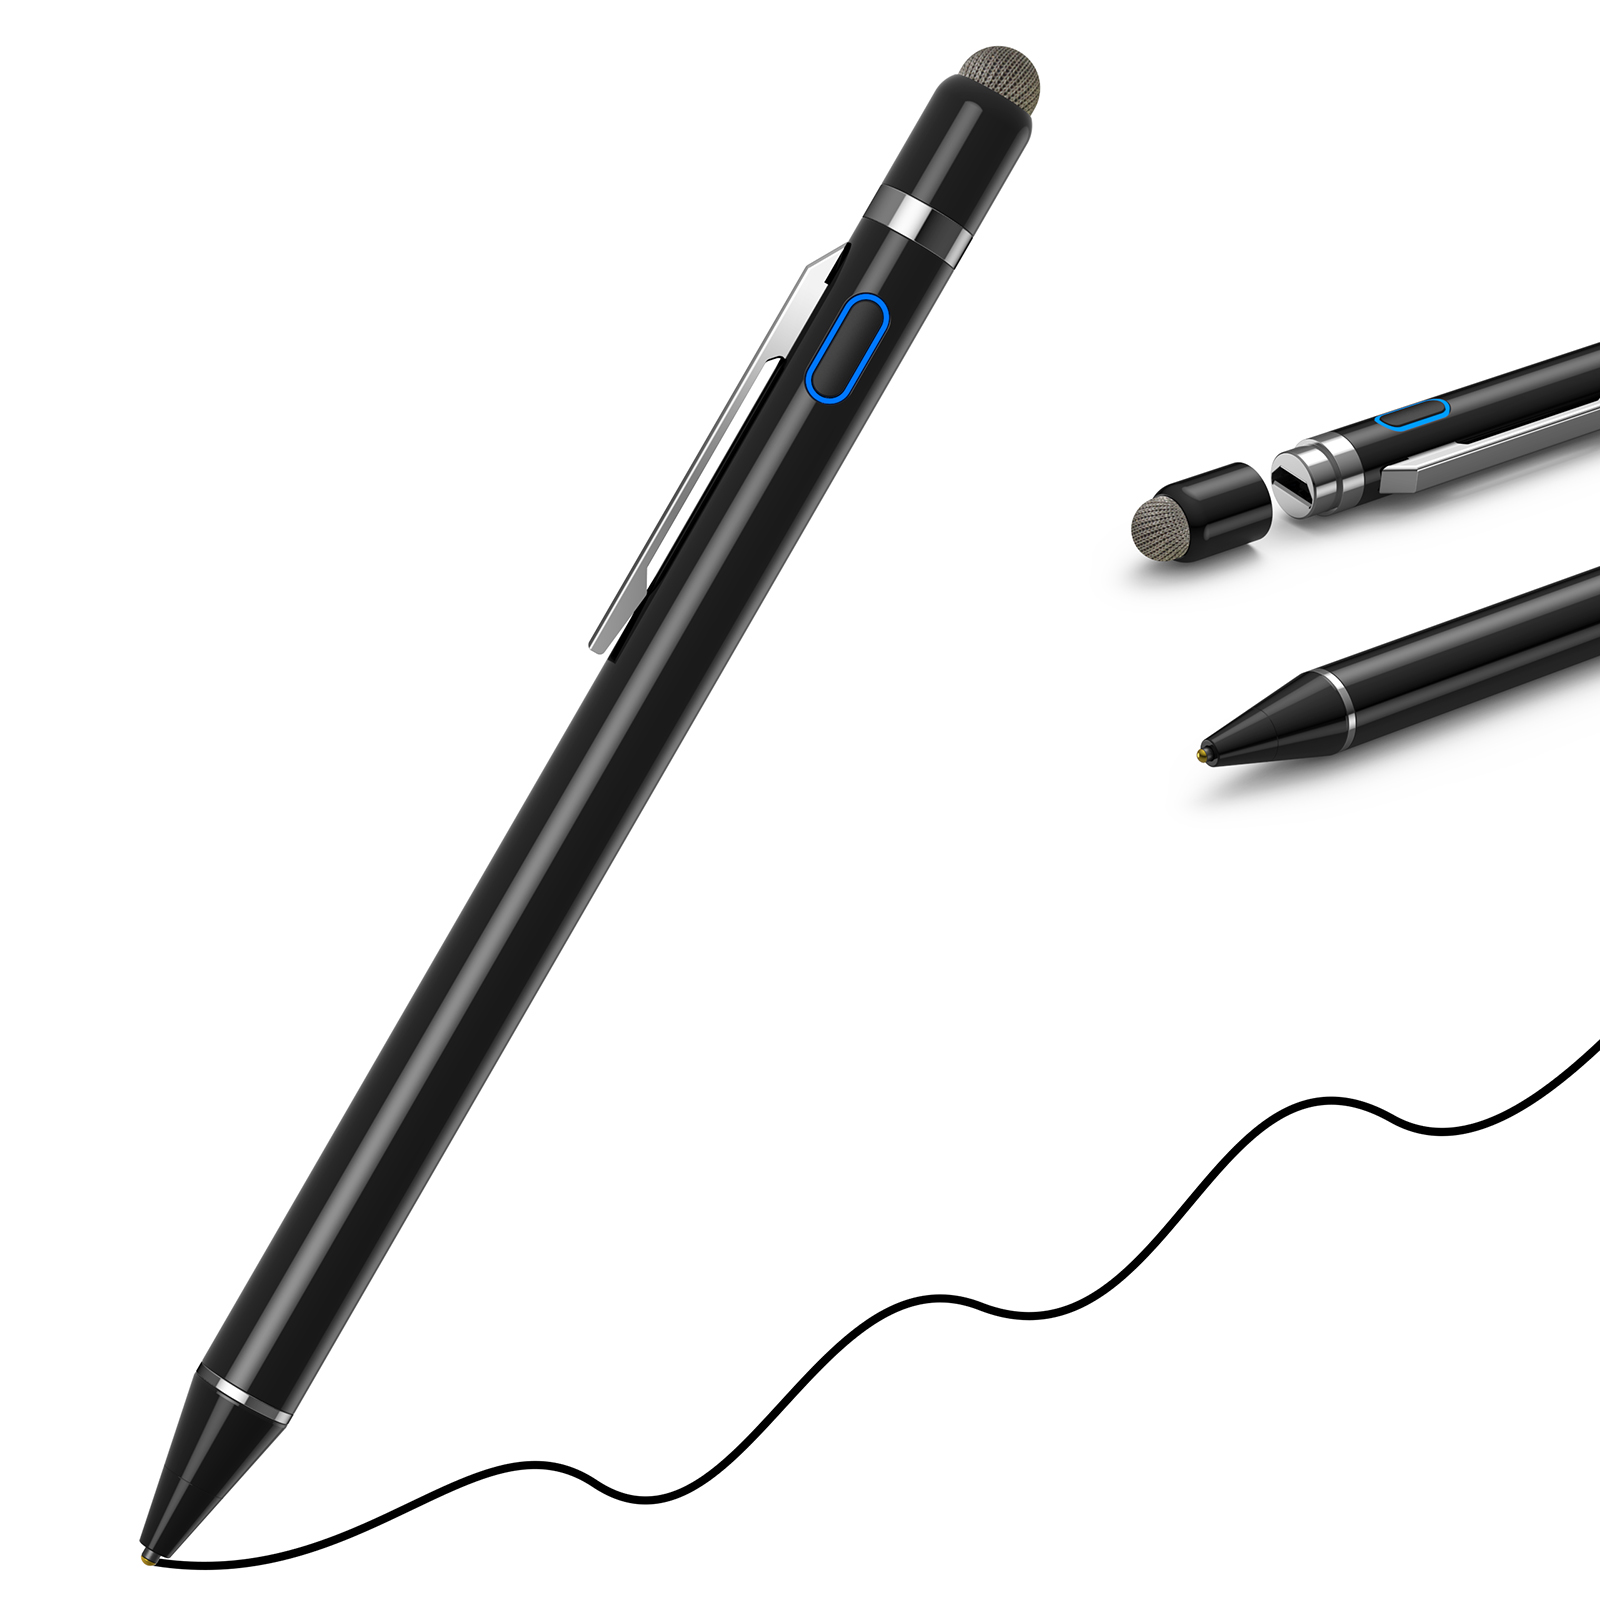 Best Price on Joyroom Stylus Pen For Ipad - K825 2in1 Stylus Pen, can be used without charging – Centyoo